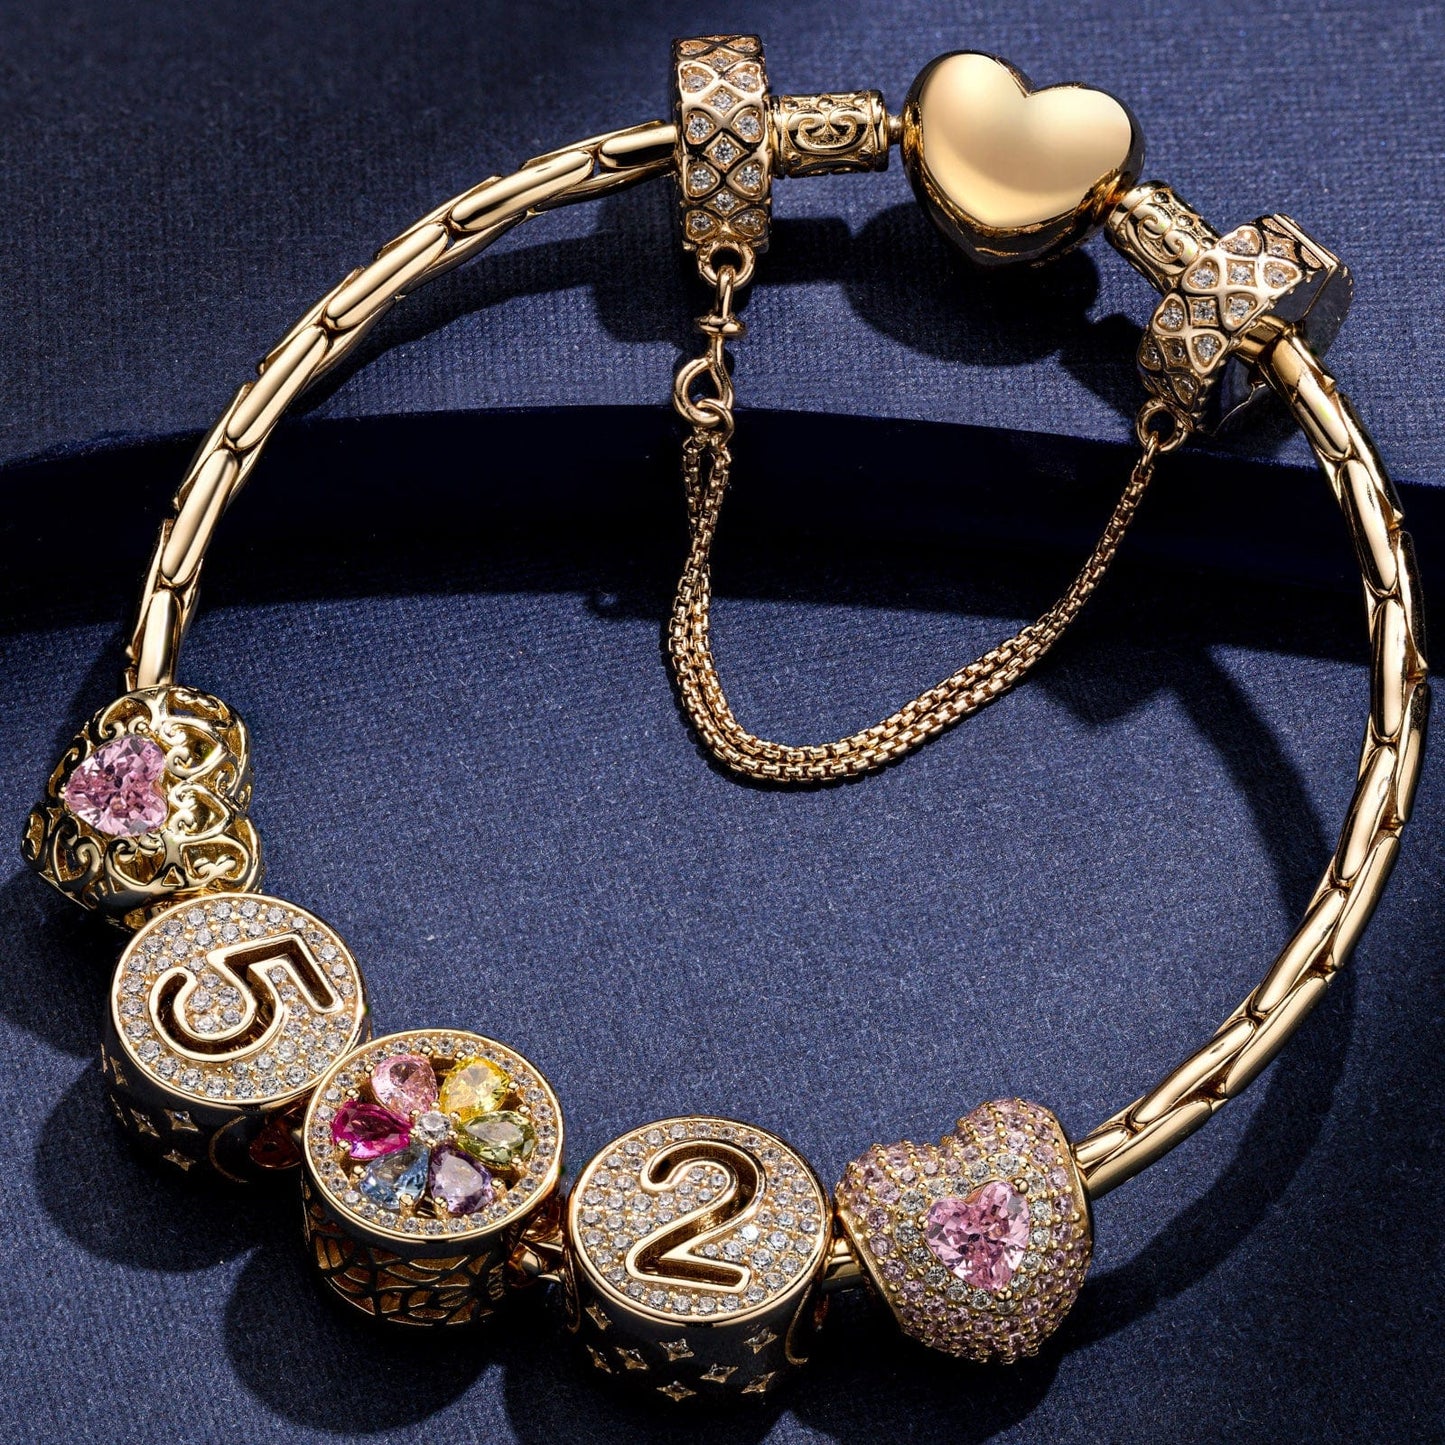 Sterling Silver Romantic Heart October Birthstone Charms Bracelet Set In 14K Gold Plated